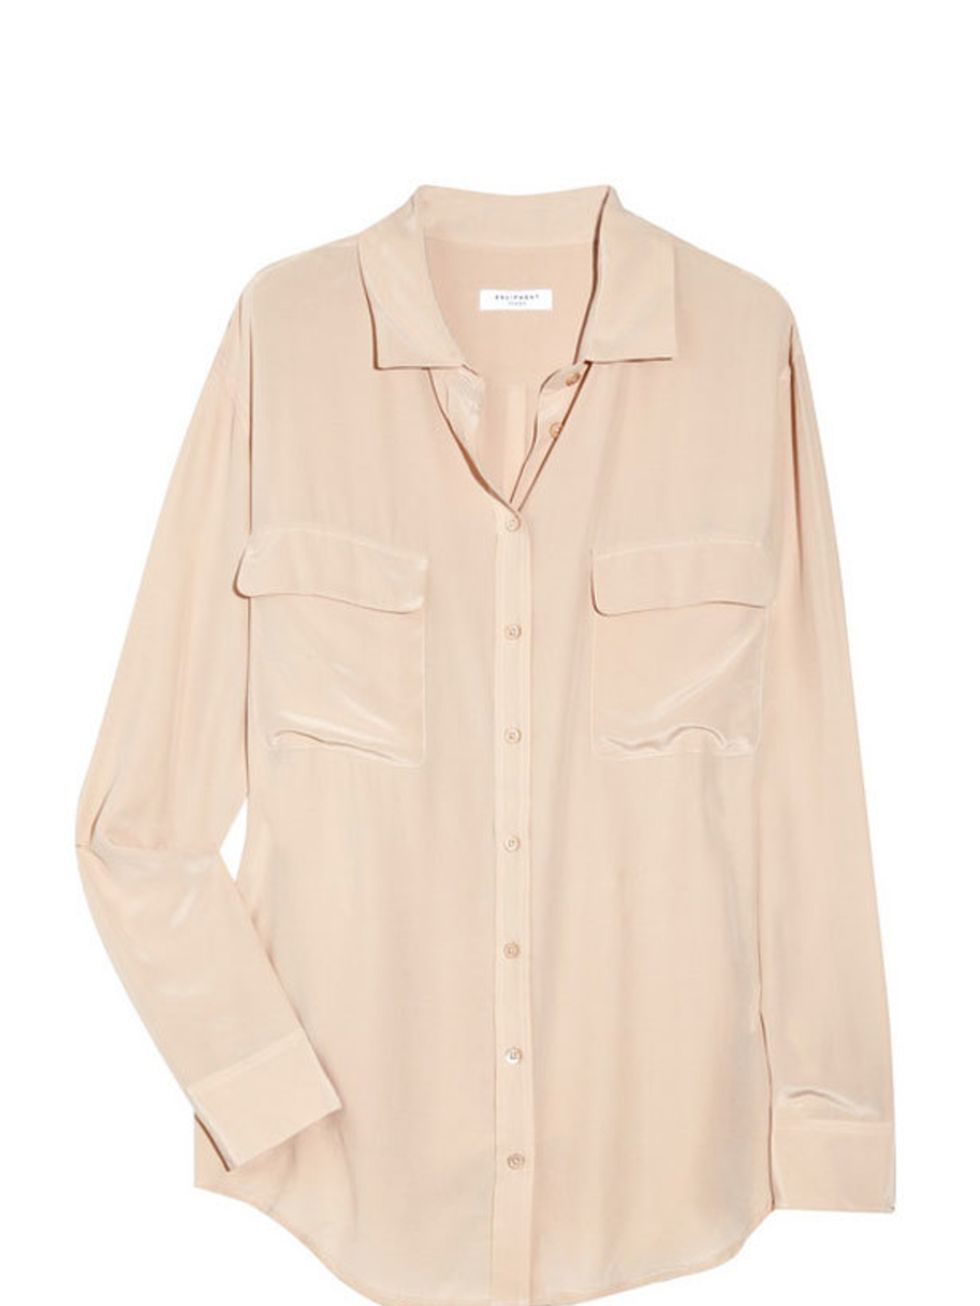 <p>This season heralds the long-awaited return of 1970s shirt label, Equipment. This timeless, luxe silk blouse will add a sexy, androgynous edge to your wardrobe. Equipment silk pocket shirt, £145, at <a href="http://www.net-a-porter.com/intl/product/101